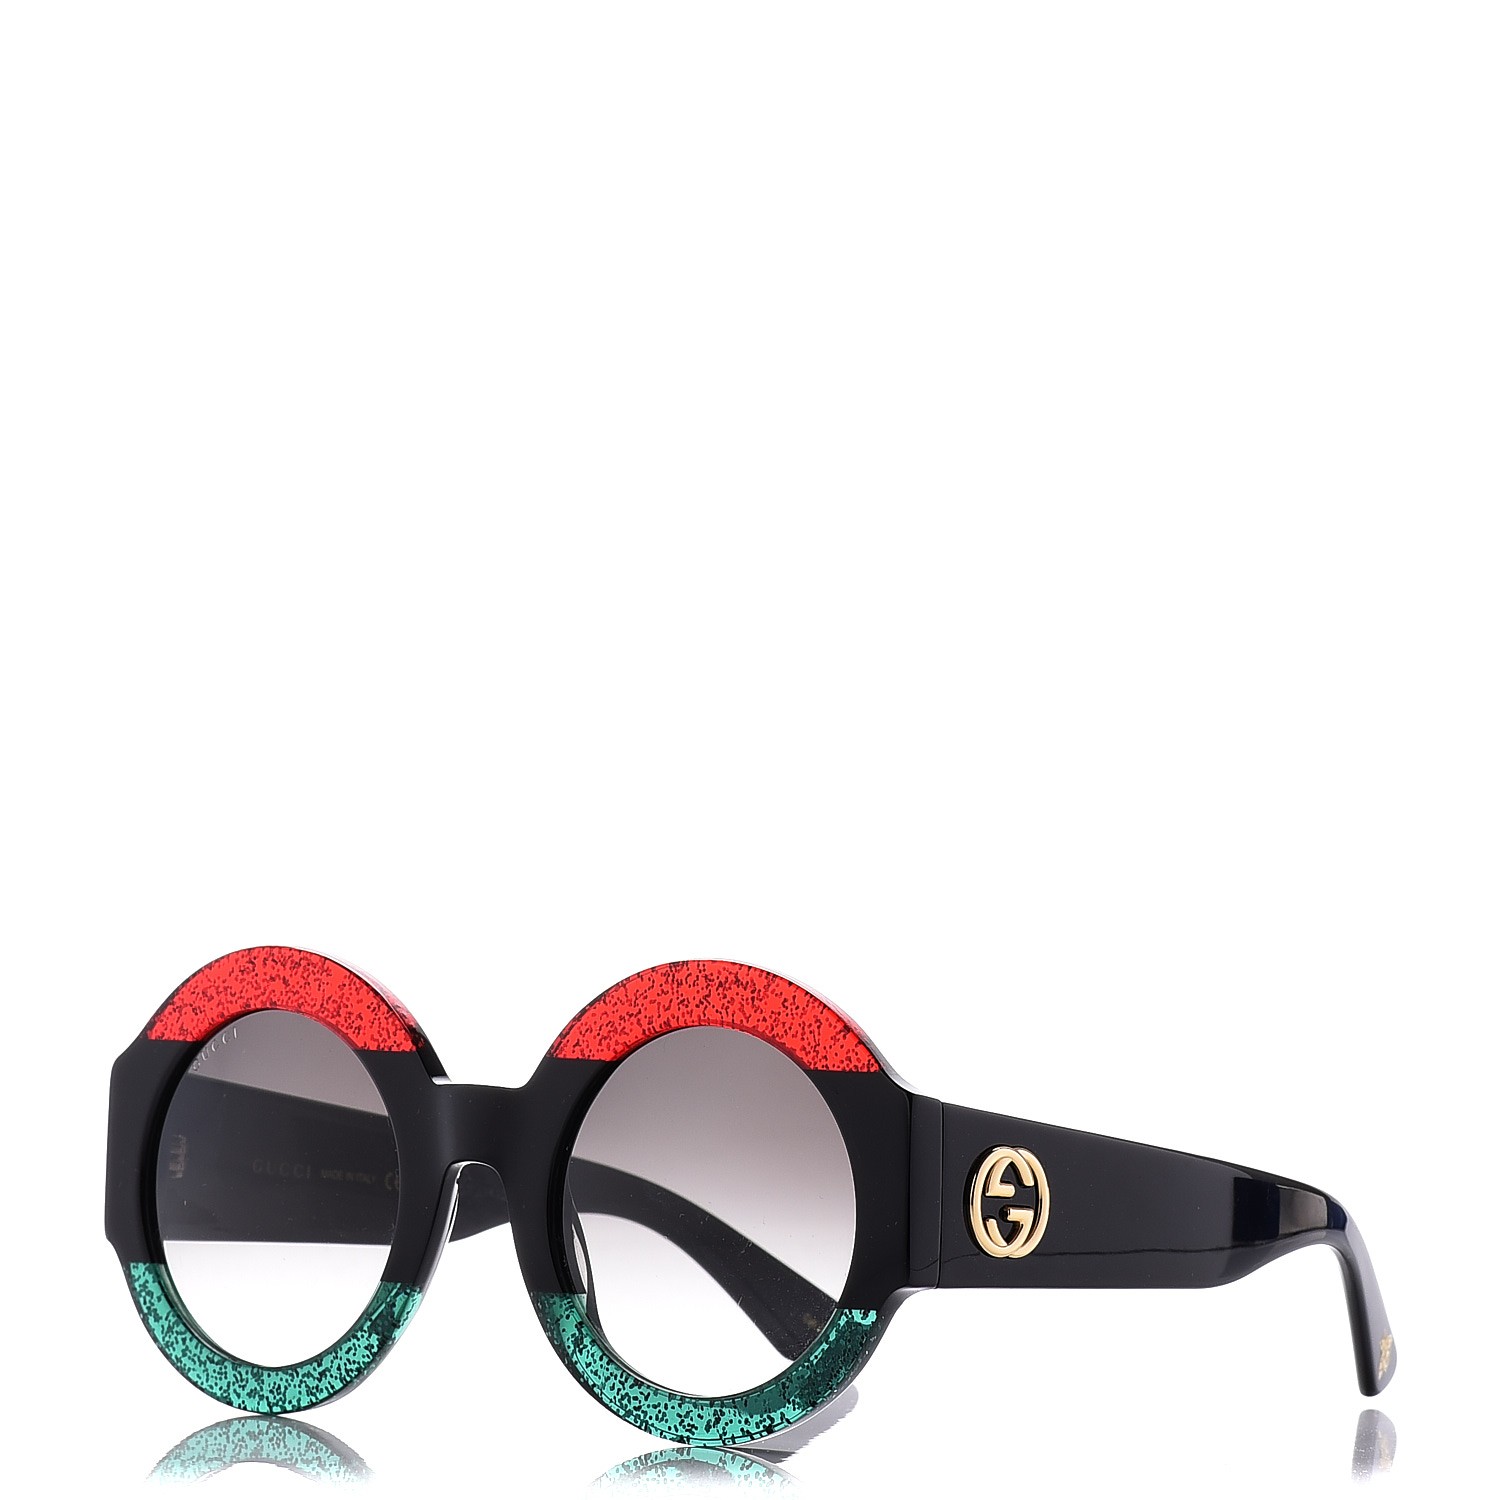 gucci sunglasses with red and green stripe